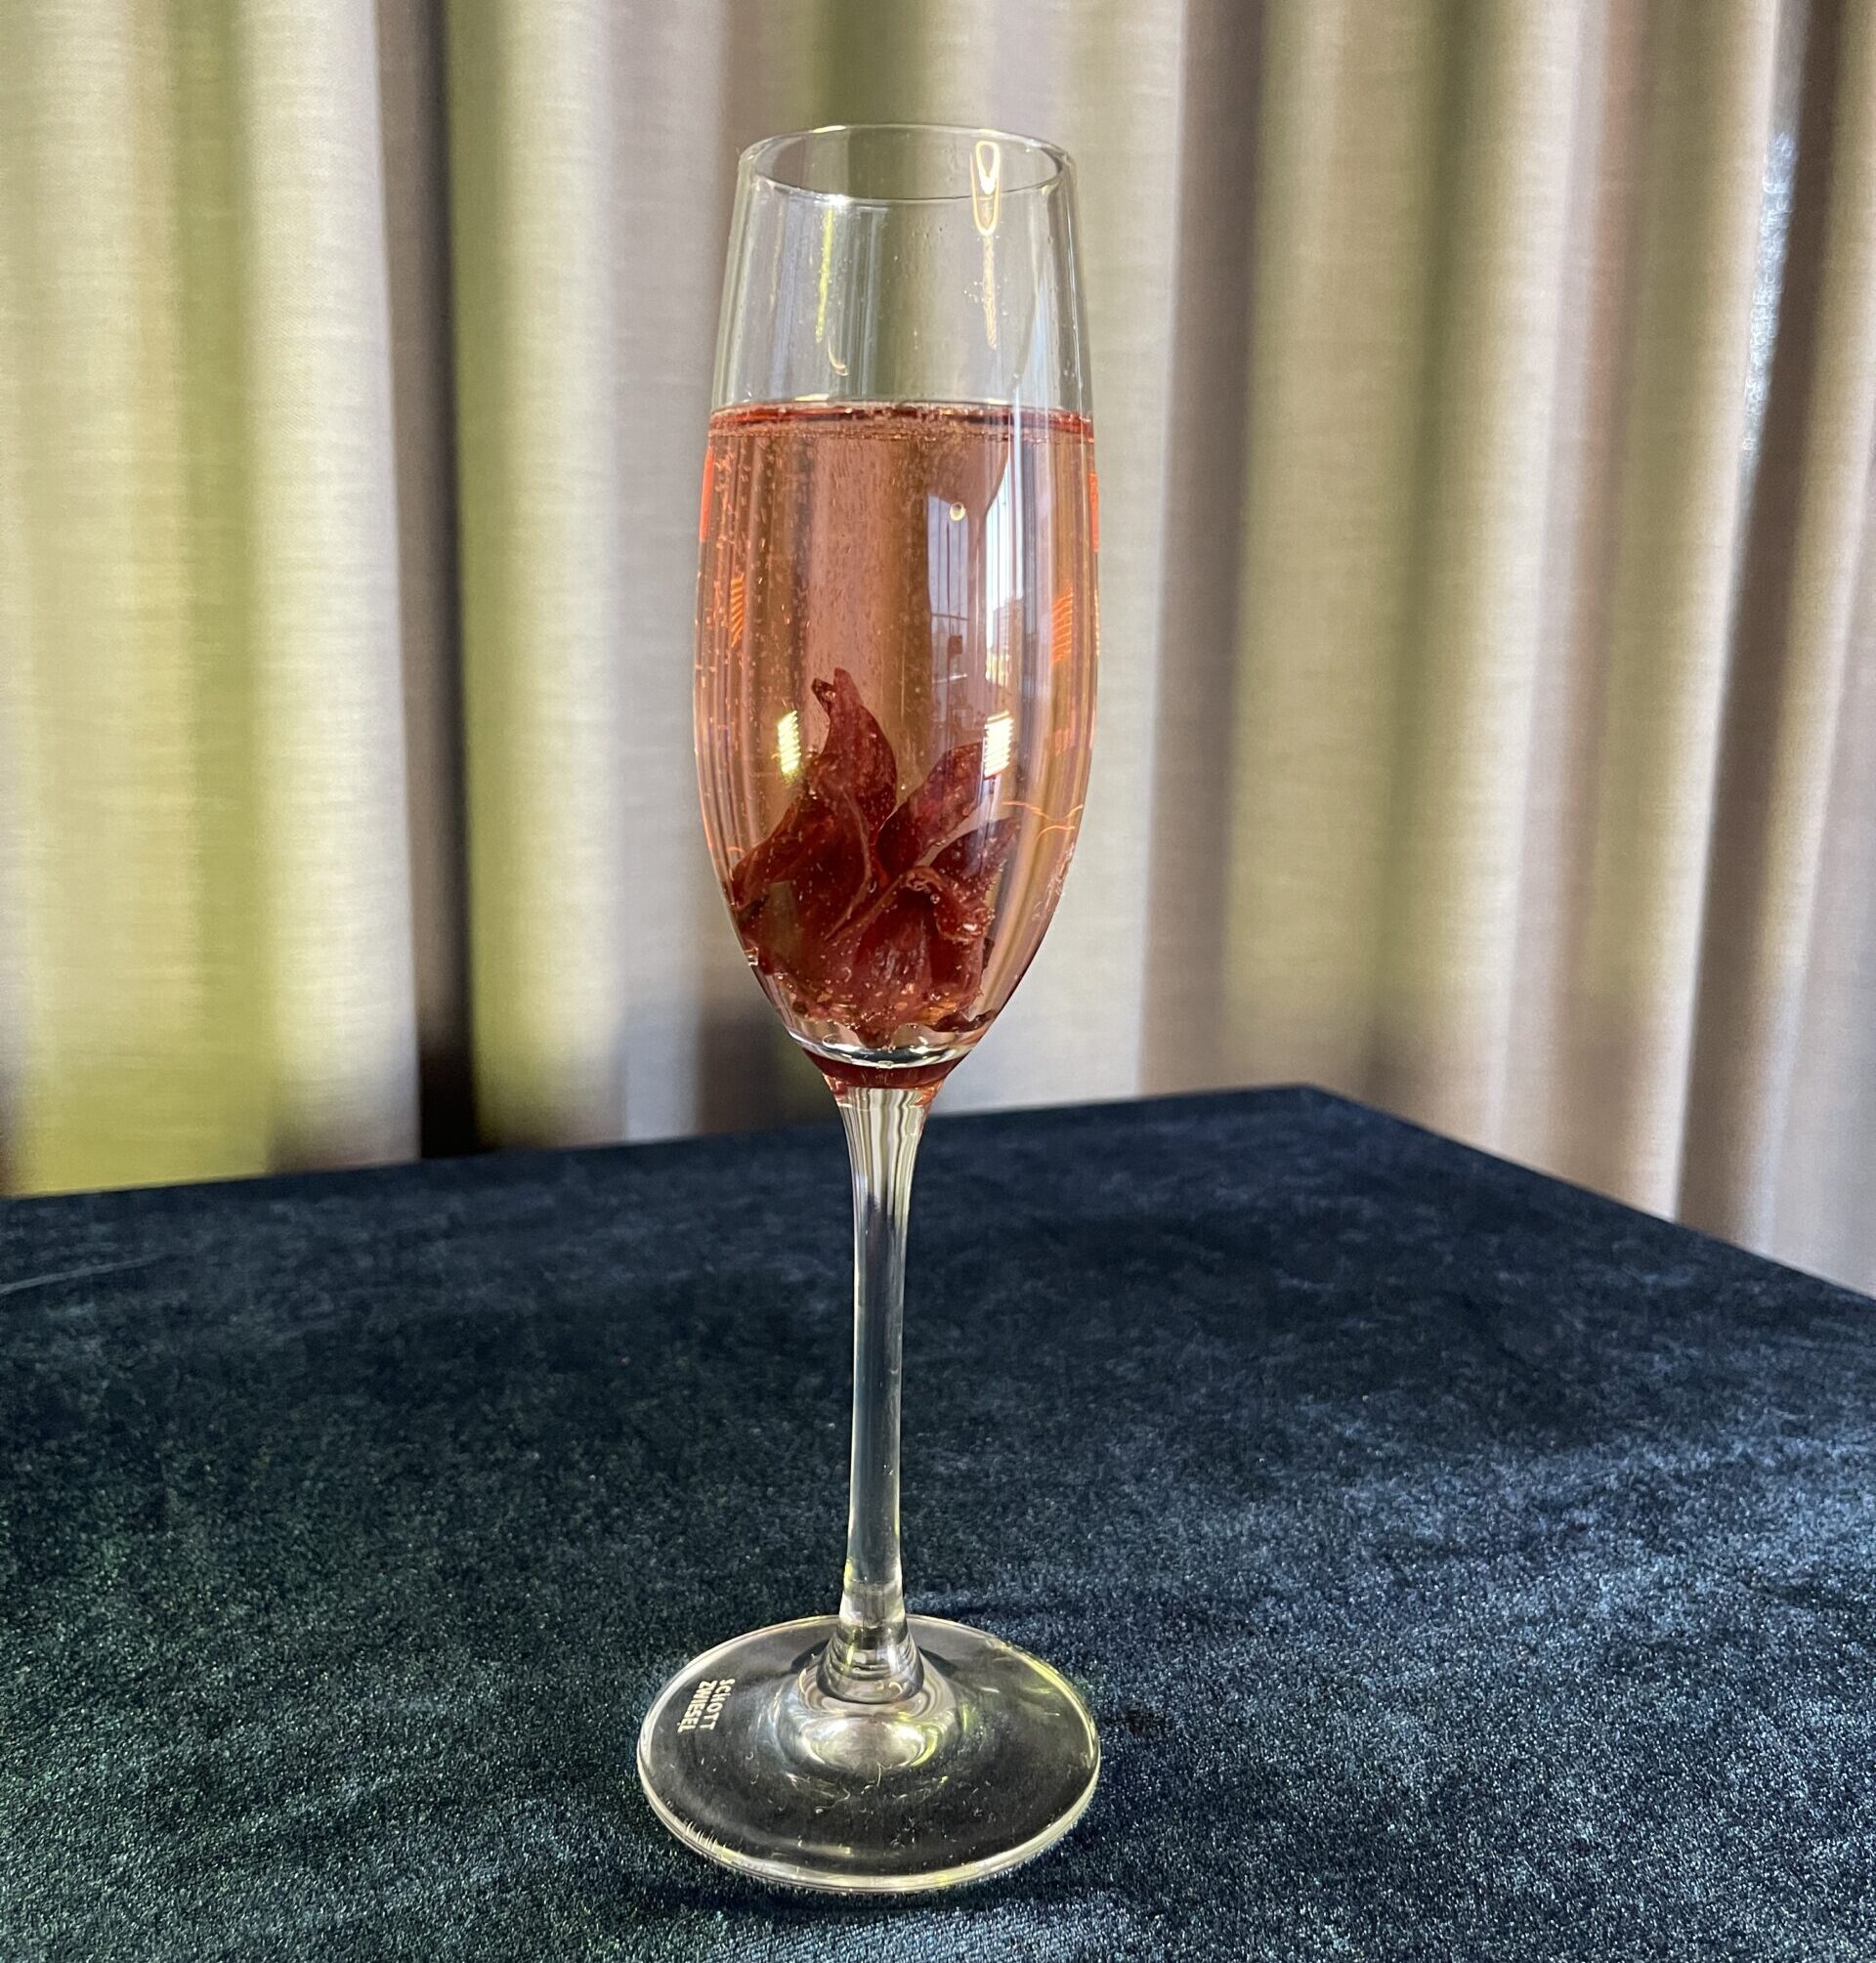 A cocktail in a champagne flute, garnished with an edible hibiscus flower.